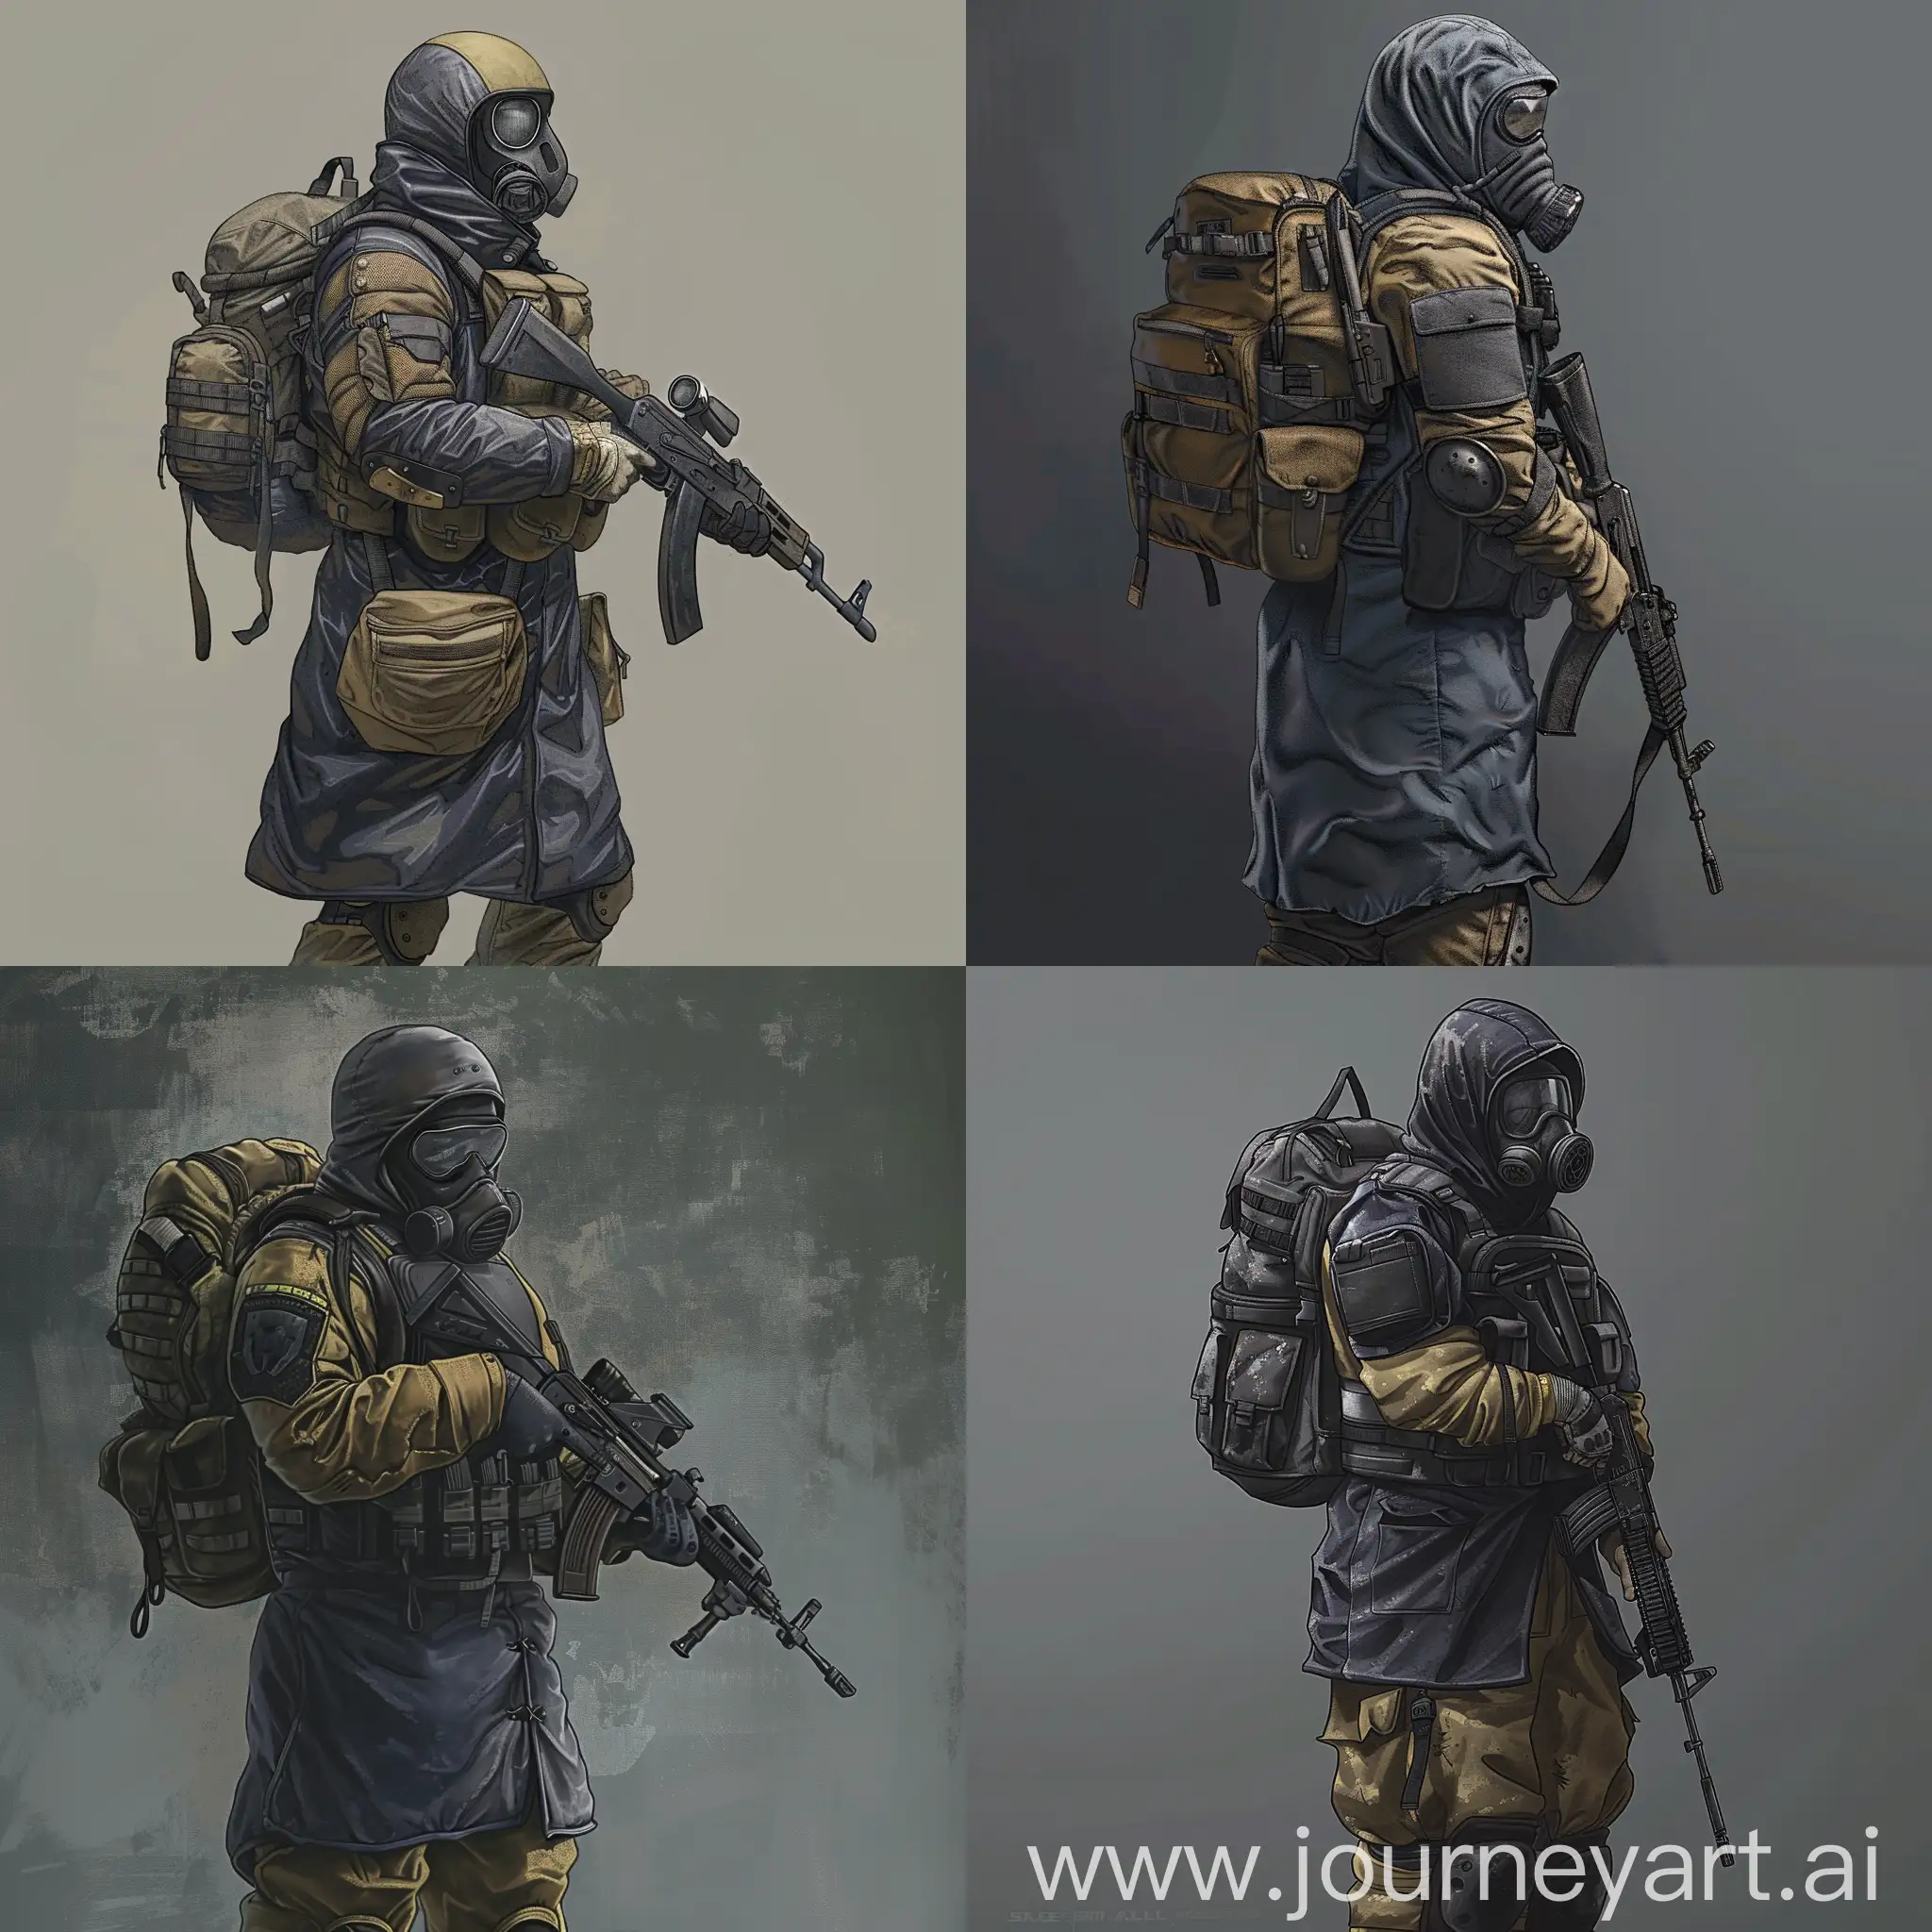 Digital design character, a mercenary from the universe of S.T.A.L.K.E.R., dressed in a dark blue military raincoat, gray military armor on his body, a gasmask on his face, a military backpack on his back, a rifle in his hands.